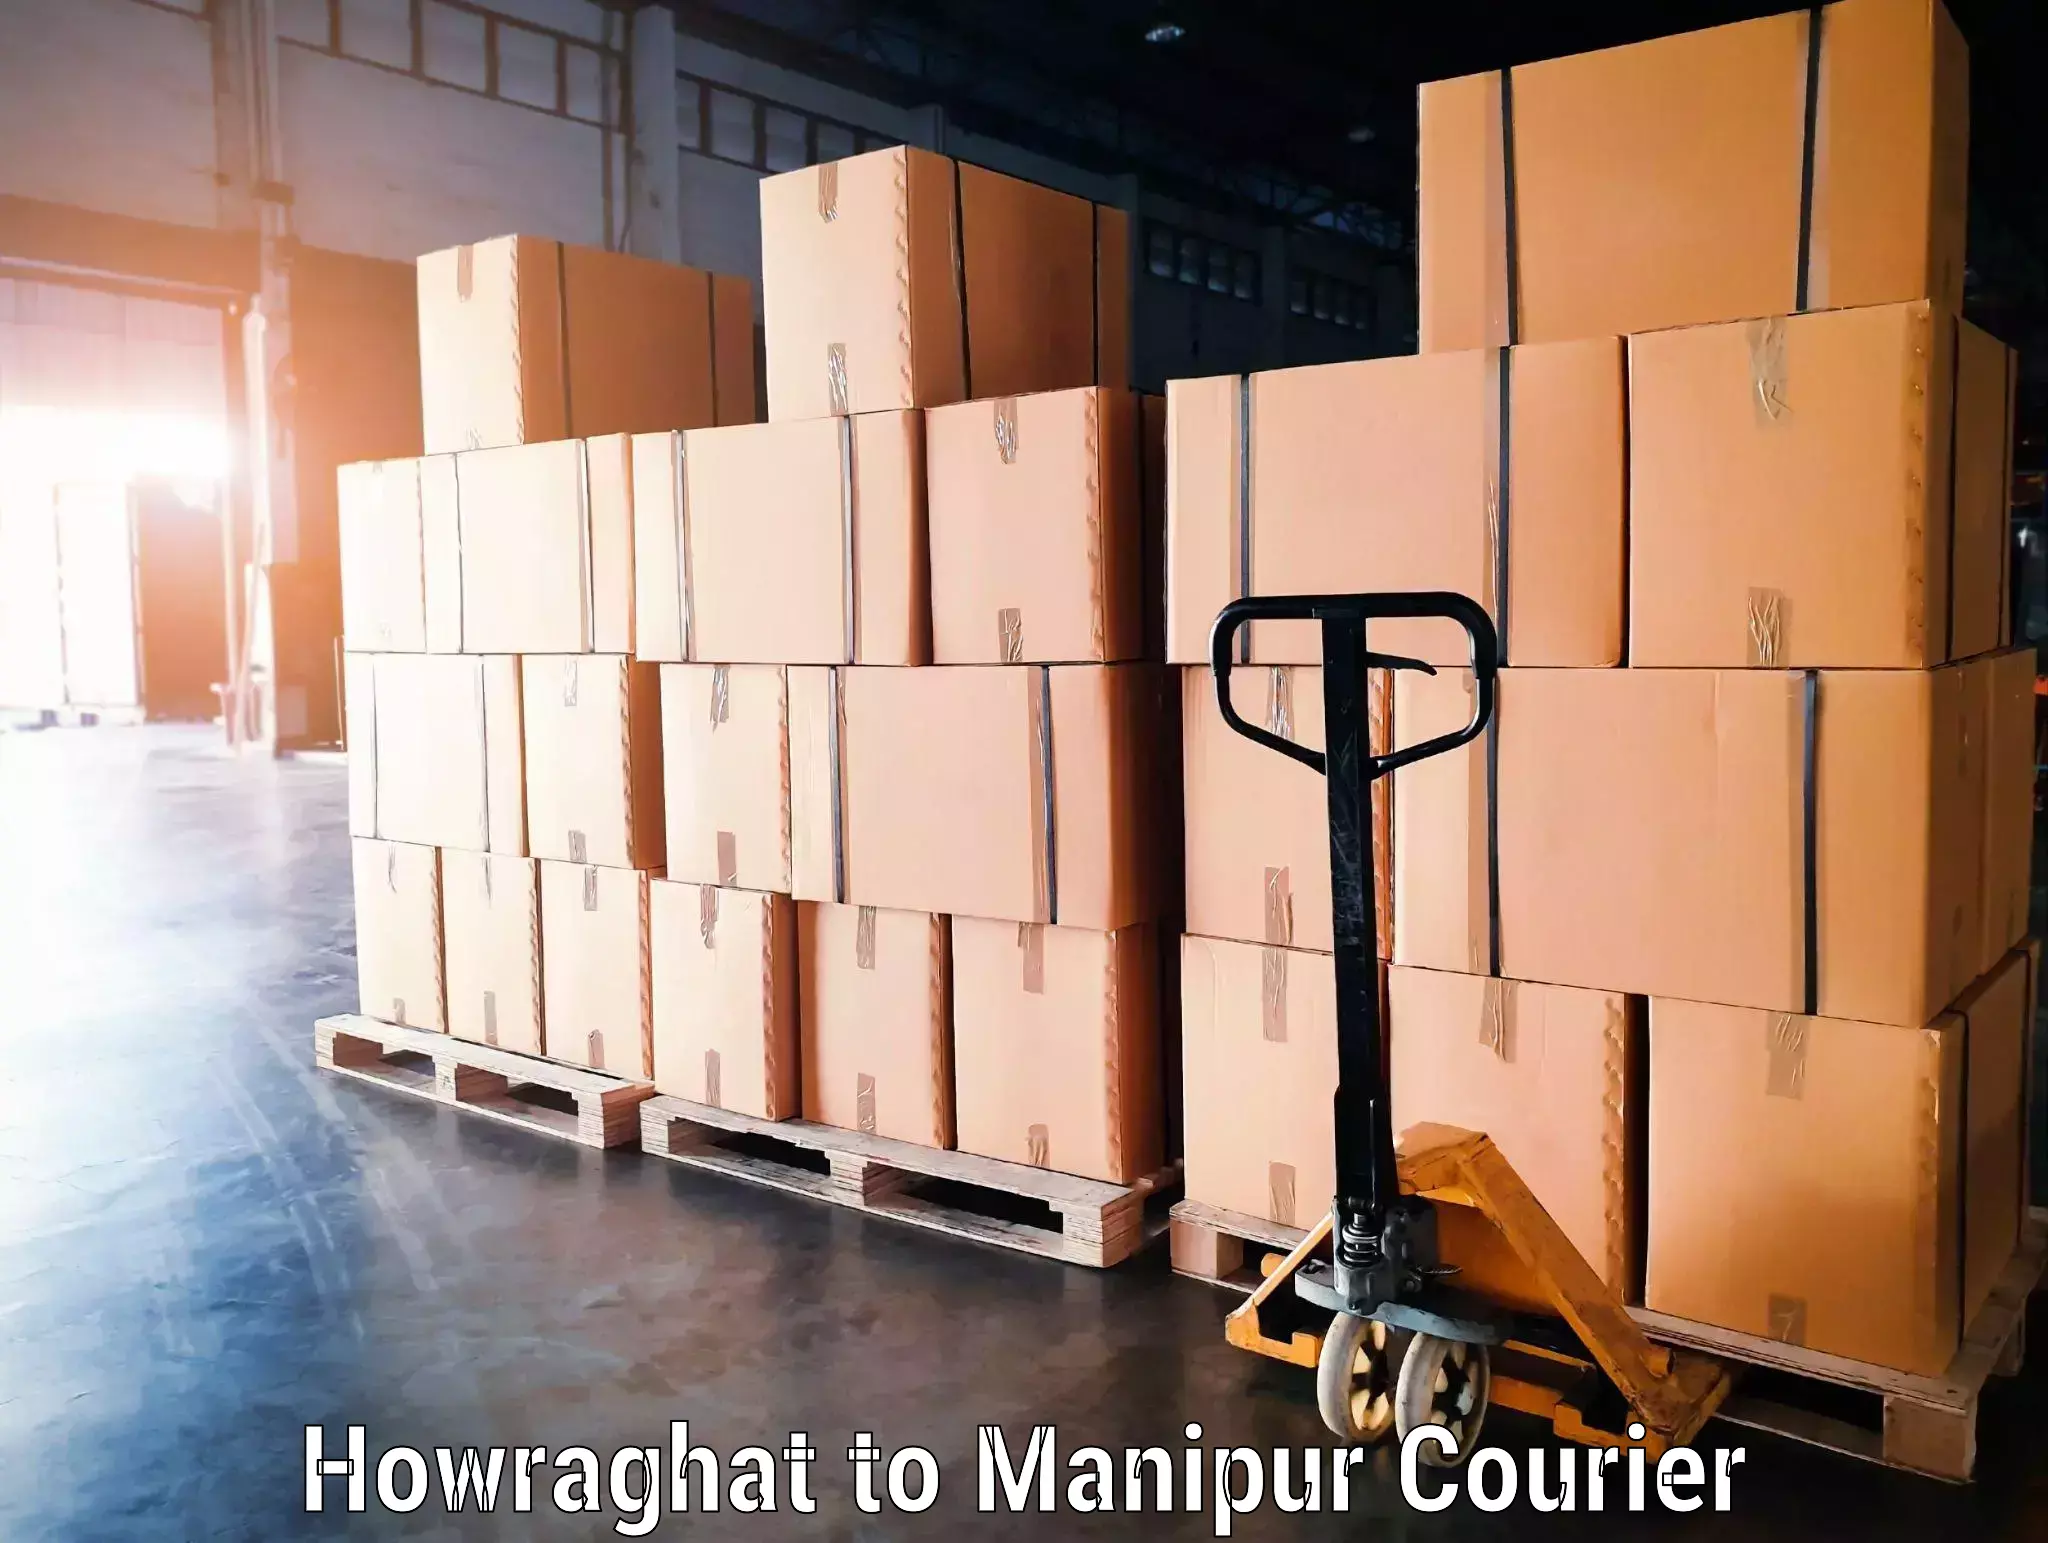 Online luggage shipping booking Howraghat to Jiribam